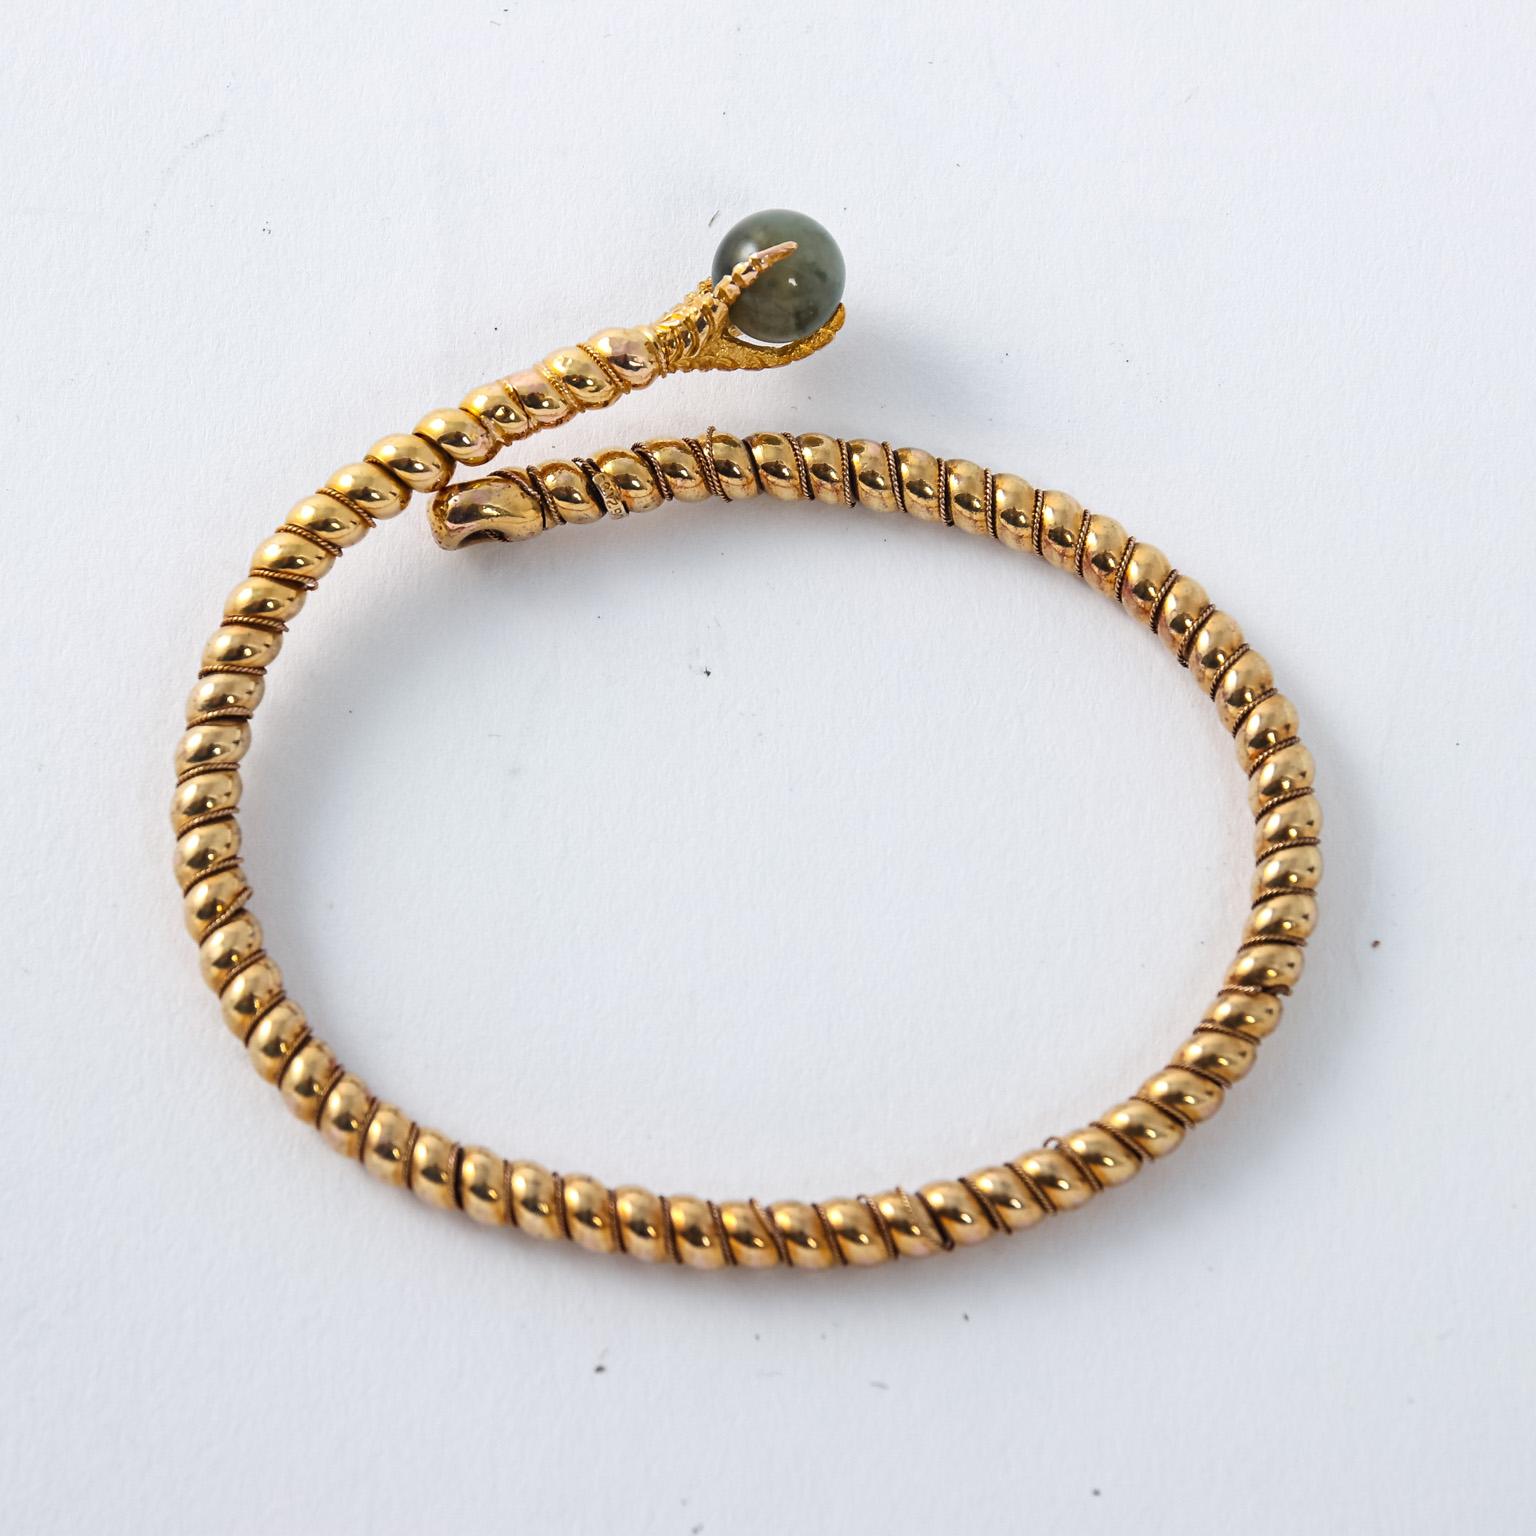 Circa 19th century Victorian 20 Karat Gold bangle bracelet in a rope design with claw on the end holding a 6.00 Millimeter Cat's Eye Tourmaline held firmly by the prongs of the claw. On the end of the top piece features a hallmark. Weight 10.5